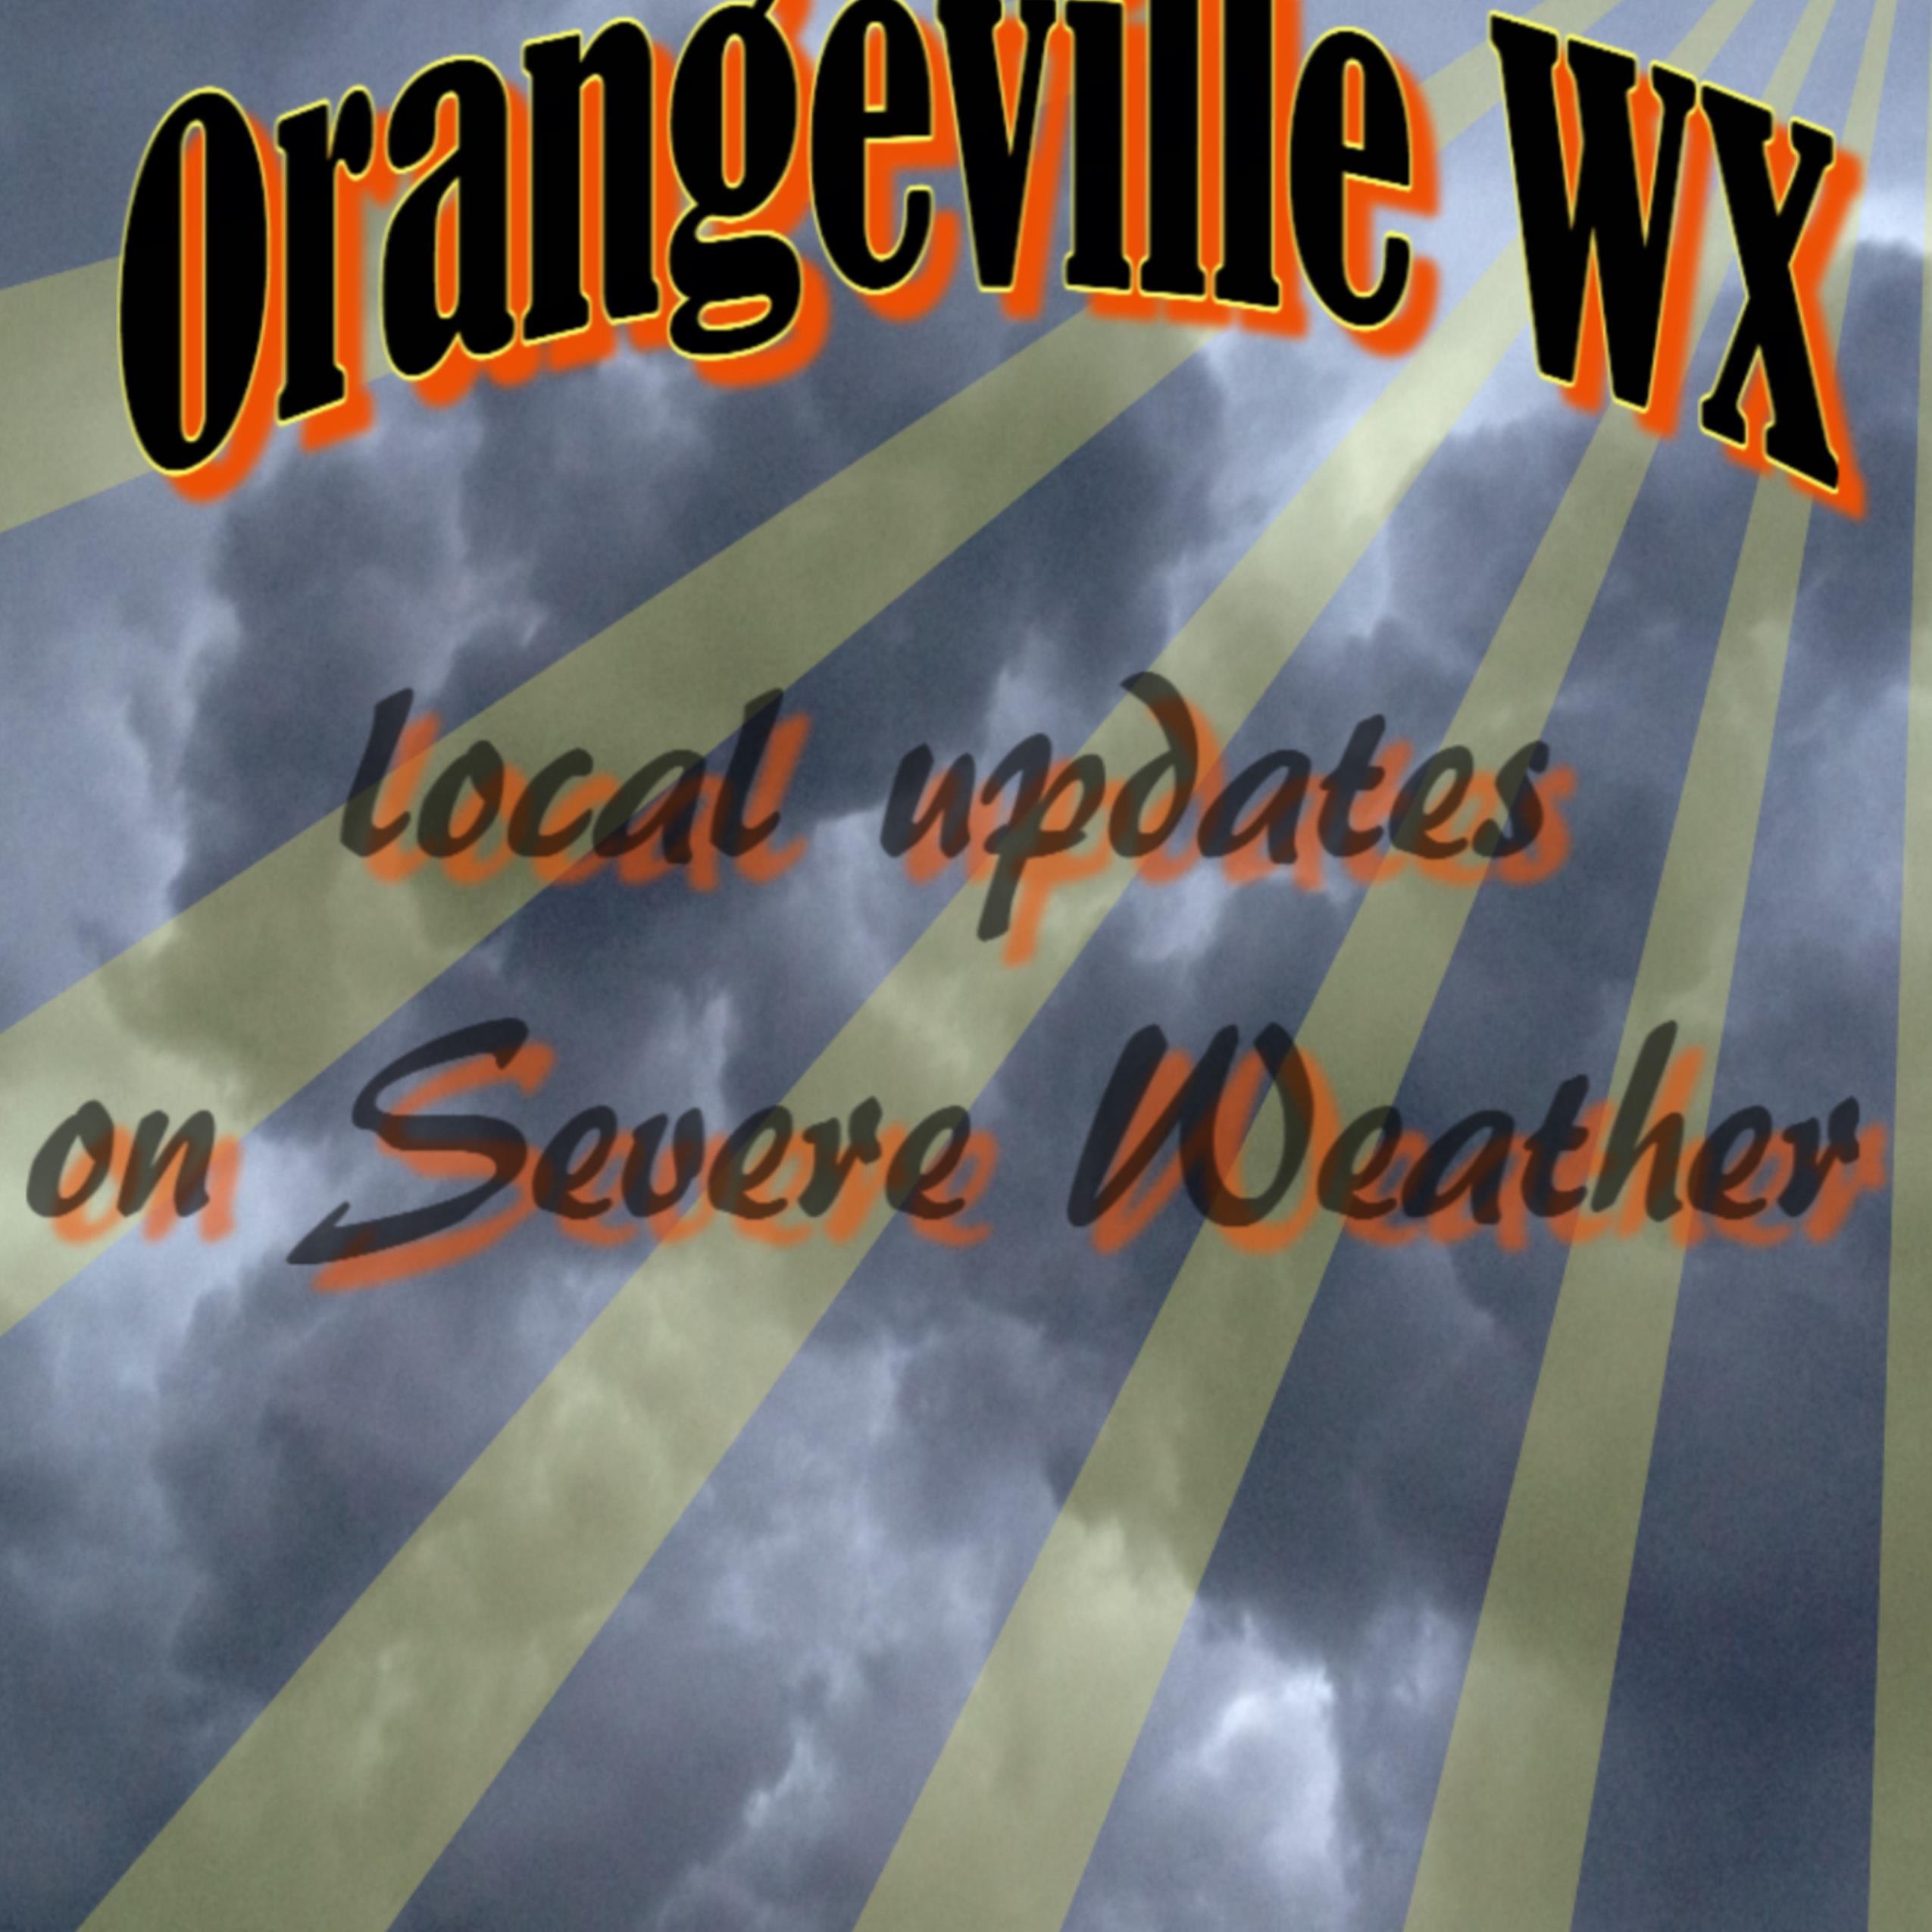 Get local Weather info. trained Canwarn spotter ON6851 
and CoCoRaHS participant, Aerial Cinematographer.  #orangeville